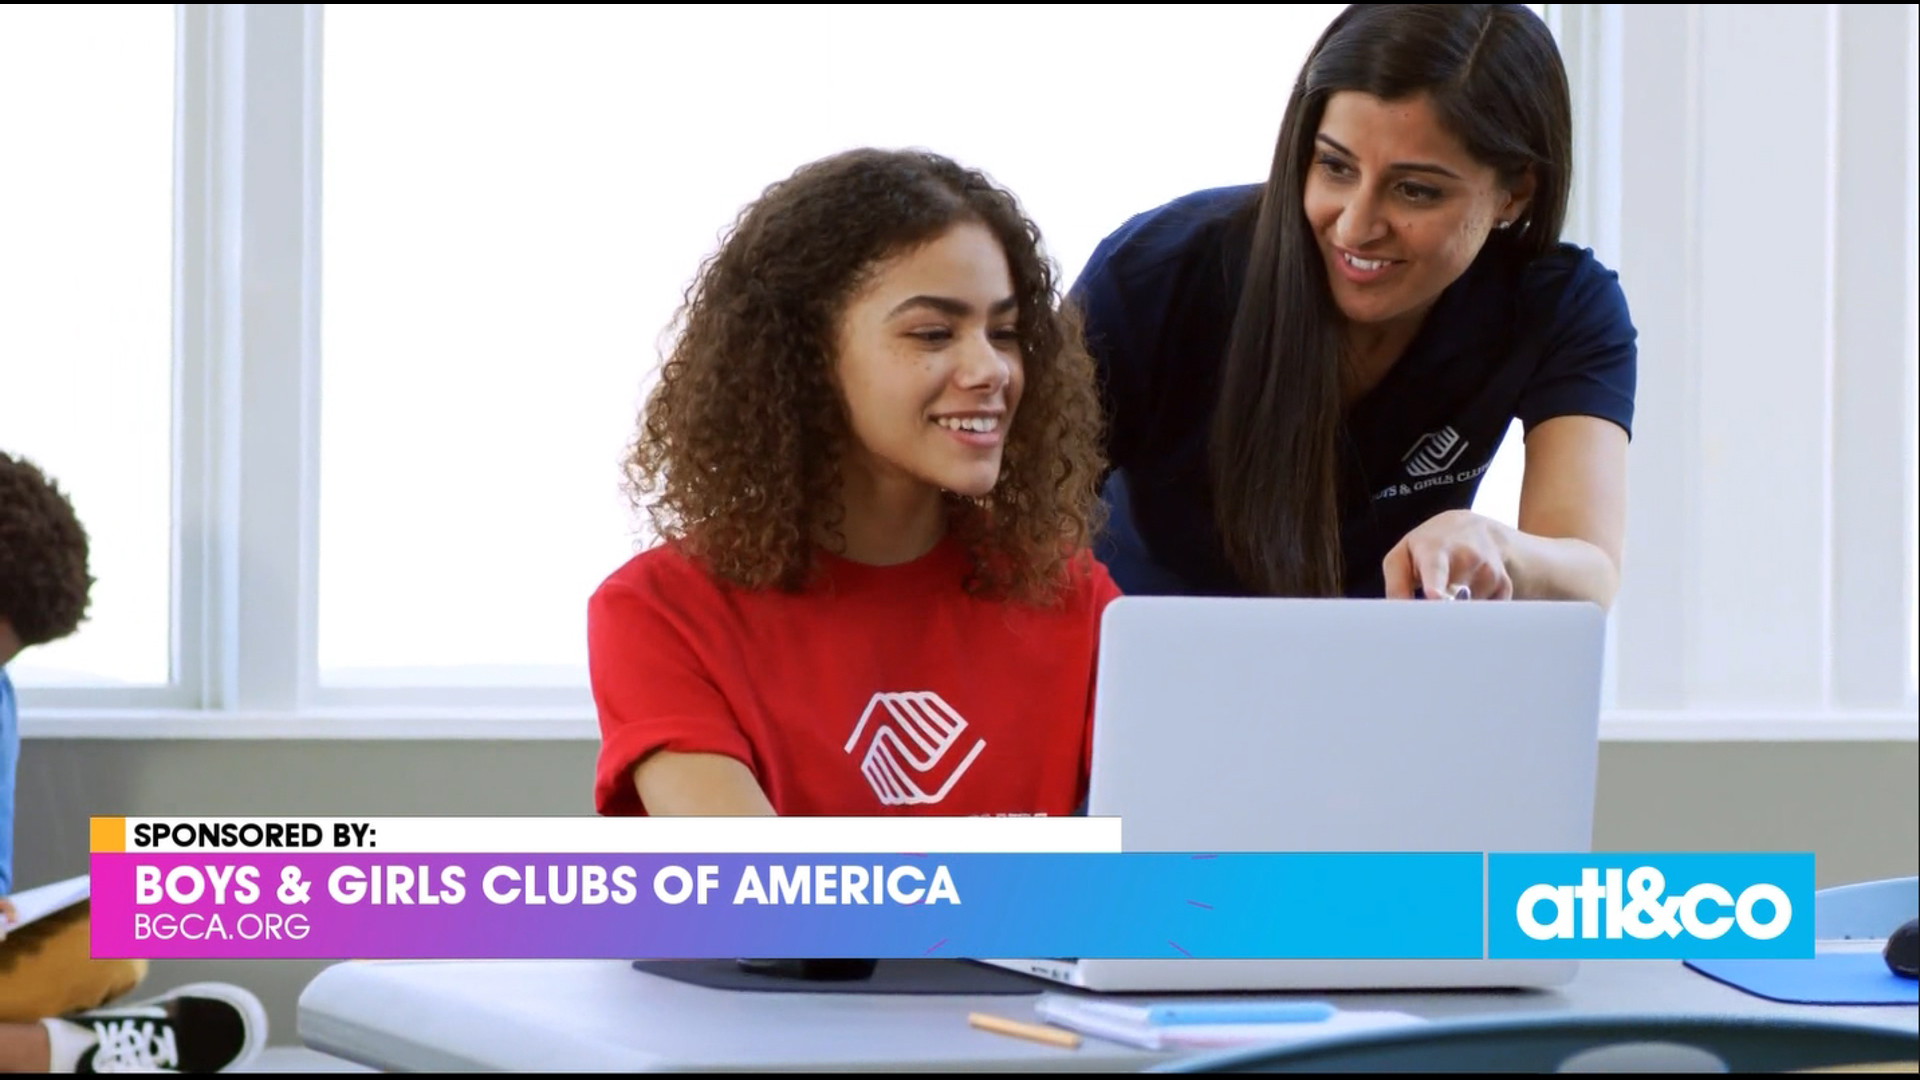 For millions of kids in need, great futures start at the Boys & Girls Club. See how you can help make a difference with proud community partners like Family Dollar.